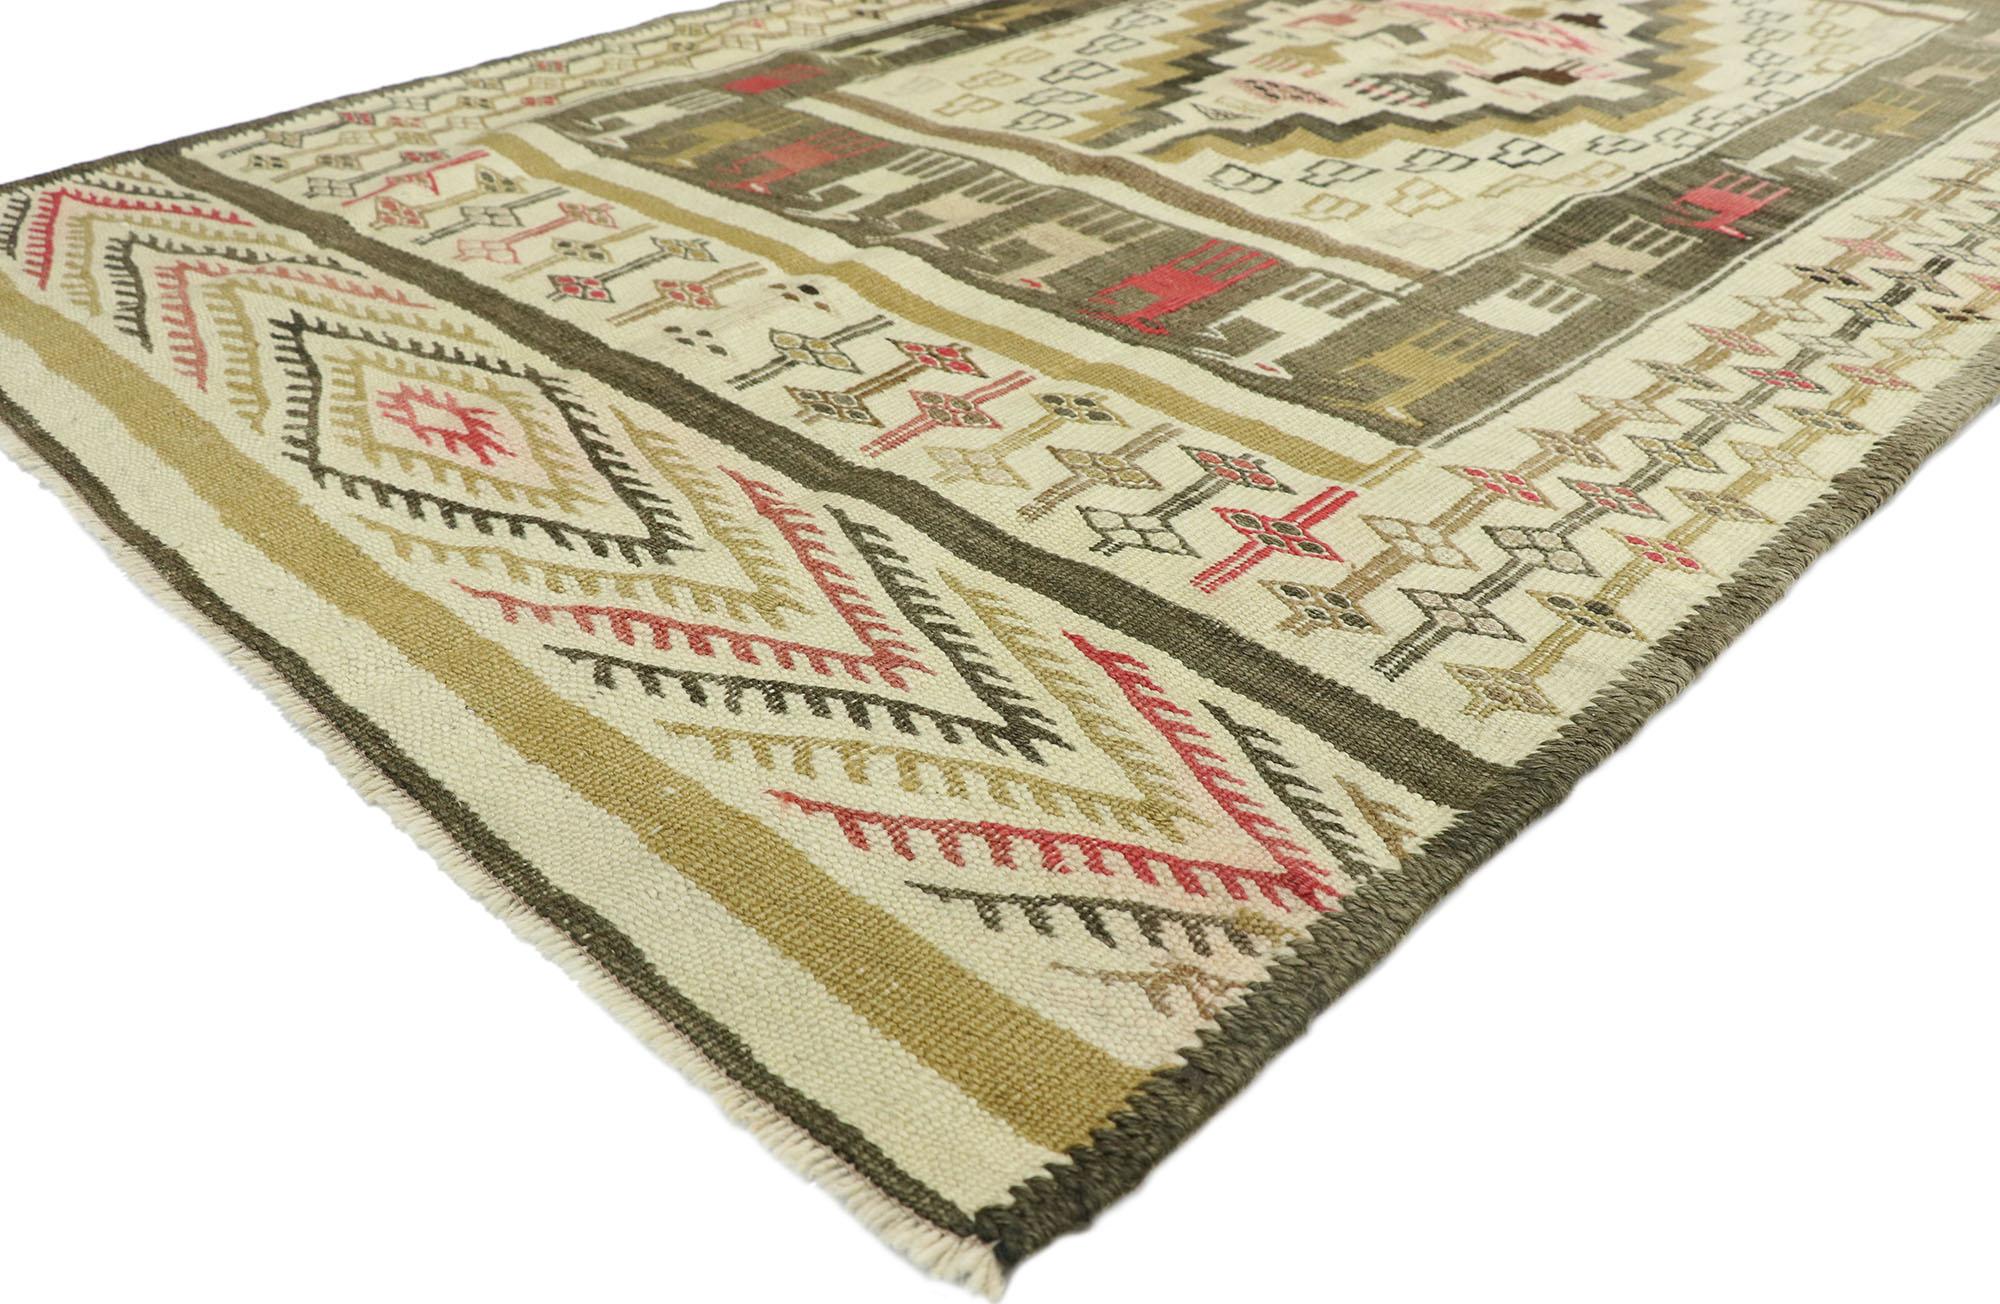 52725, vintage Turkish Kilim rug with rustic lodge style and modern tribal vibes. Masculine and geometric, this handwoven wool vintage Turkish Kilim rug features a central rectangle highlighting a stepped lozenge medallion patterned with ambiguous